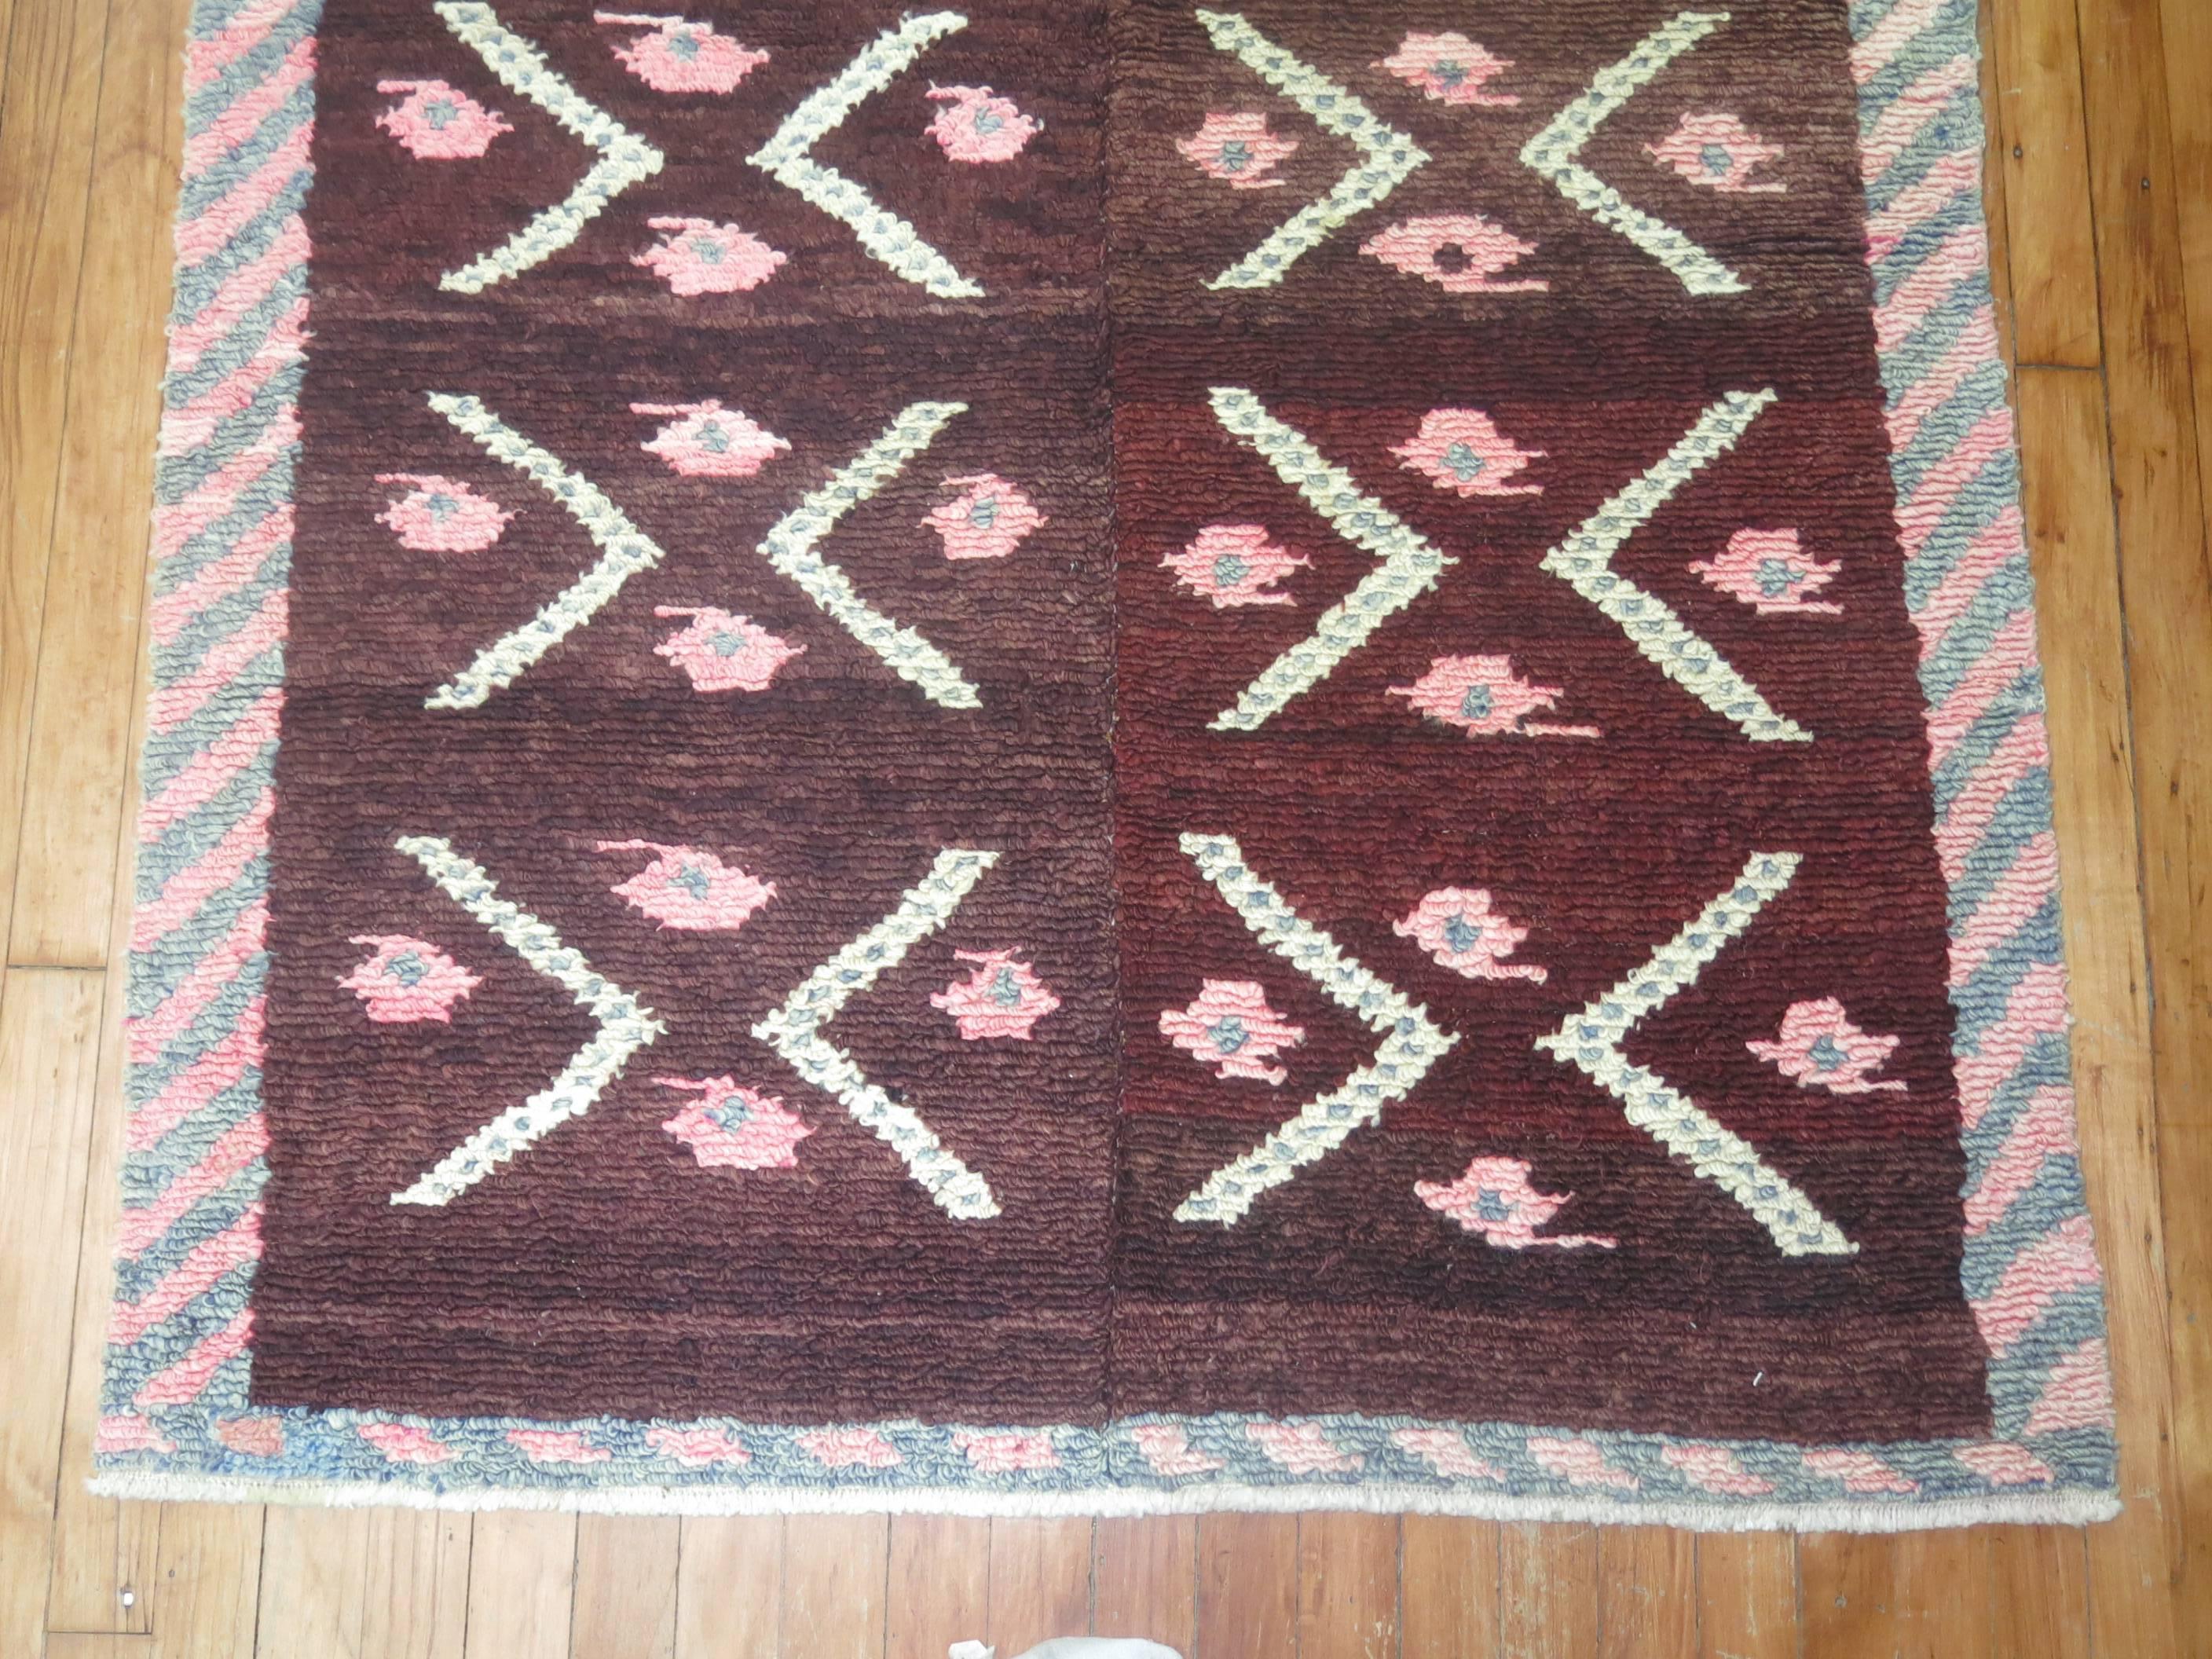 Sweet feminine looking vintage Turkish rug from the middle of the 20th century.